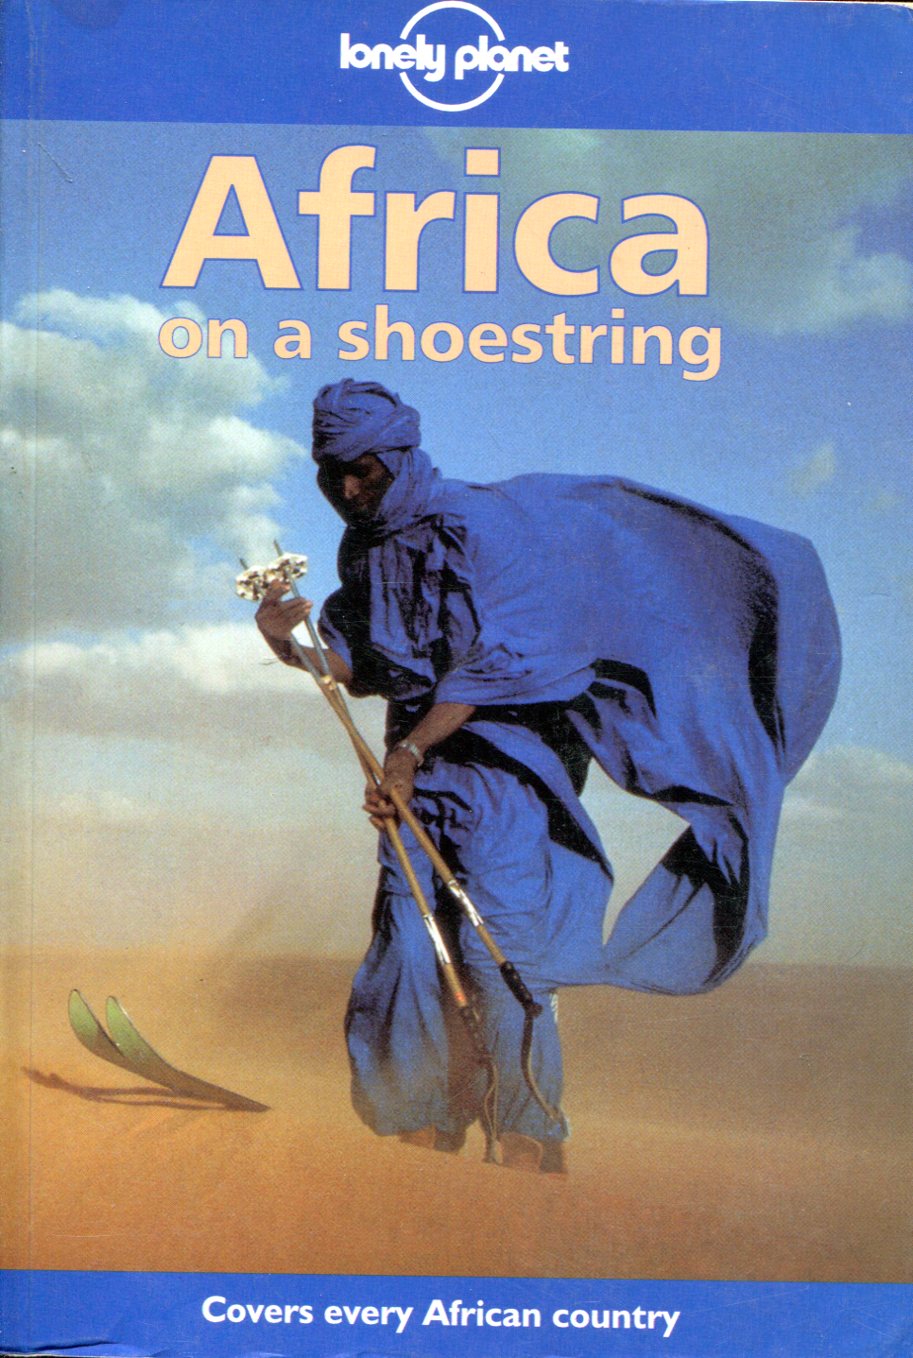 Africa on a shoestring - Lonely planet